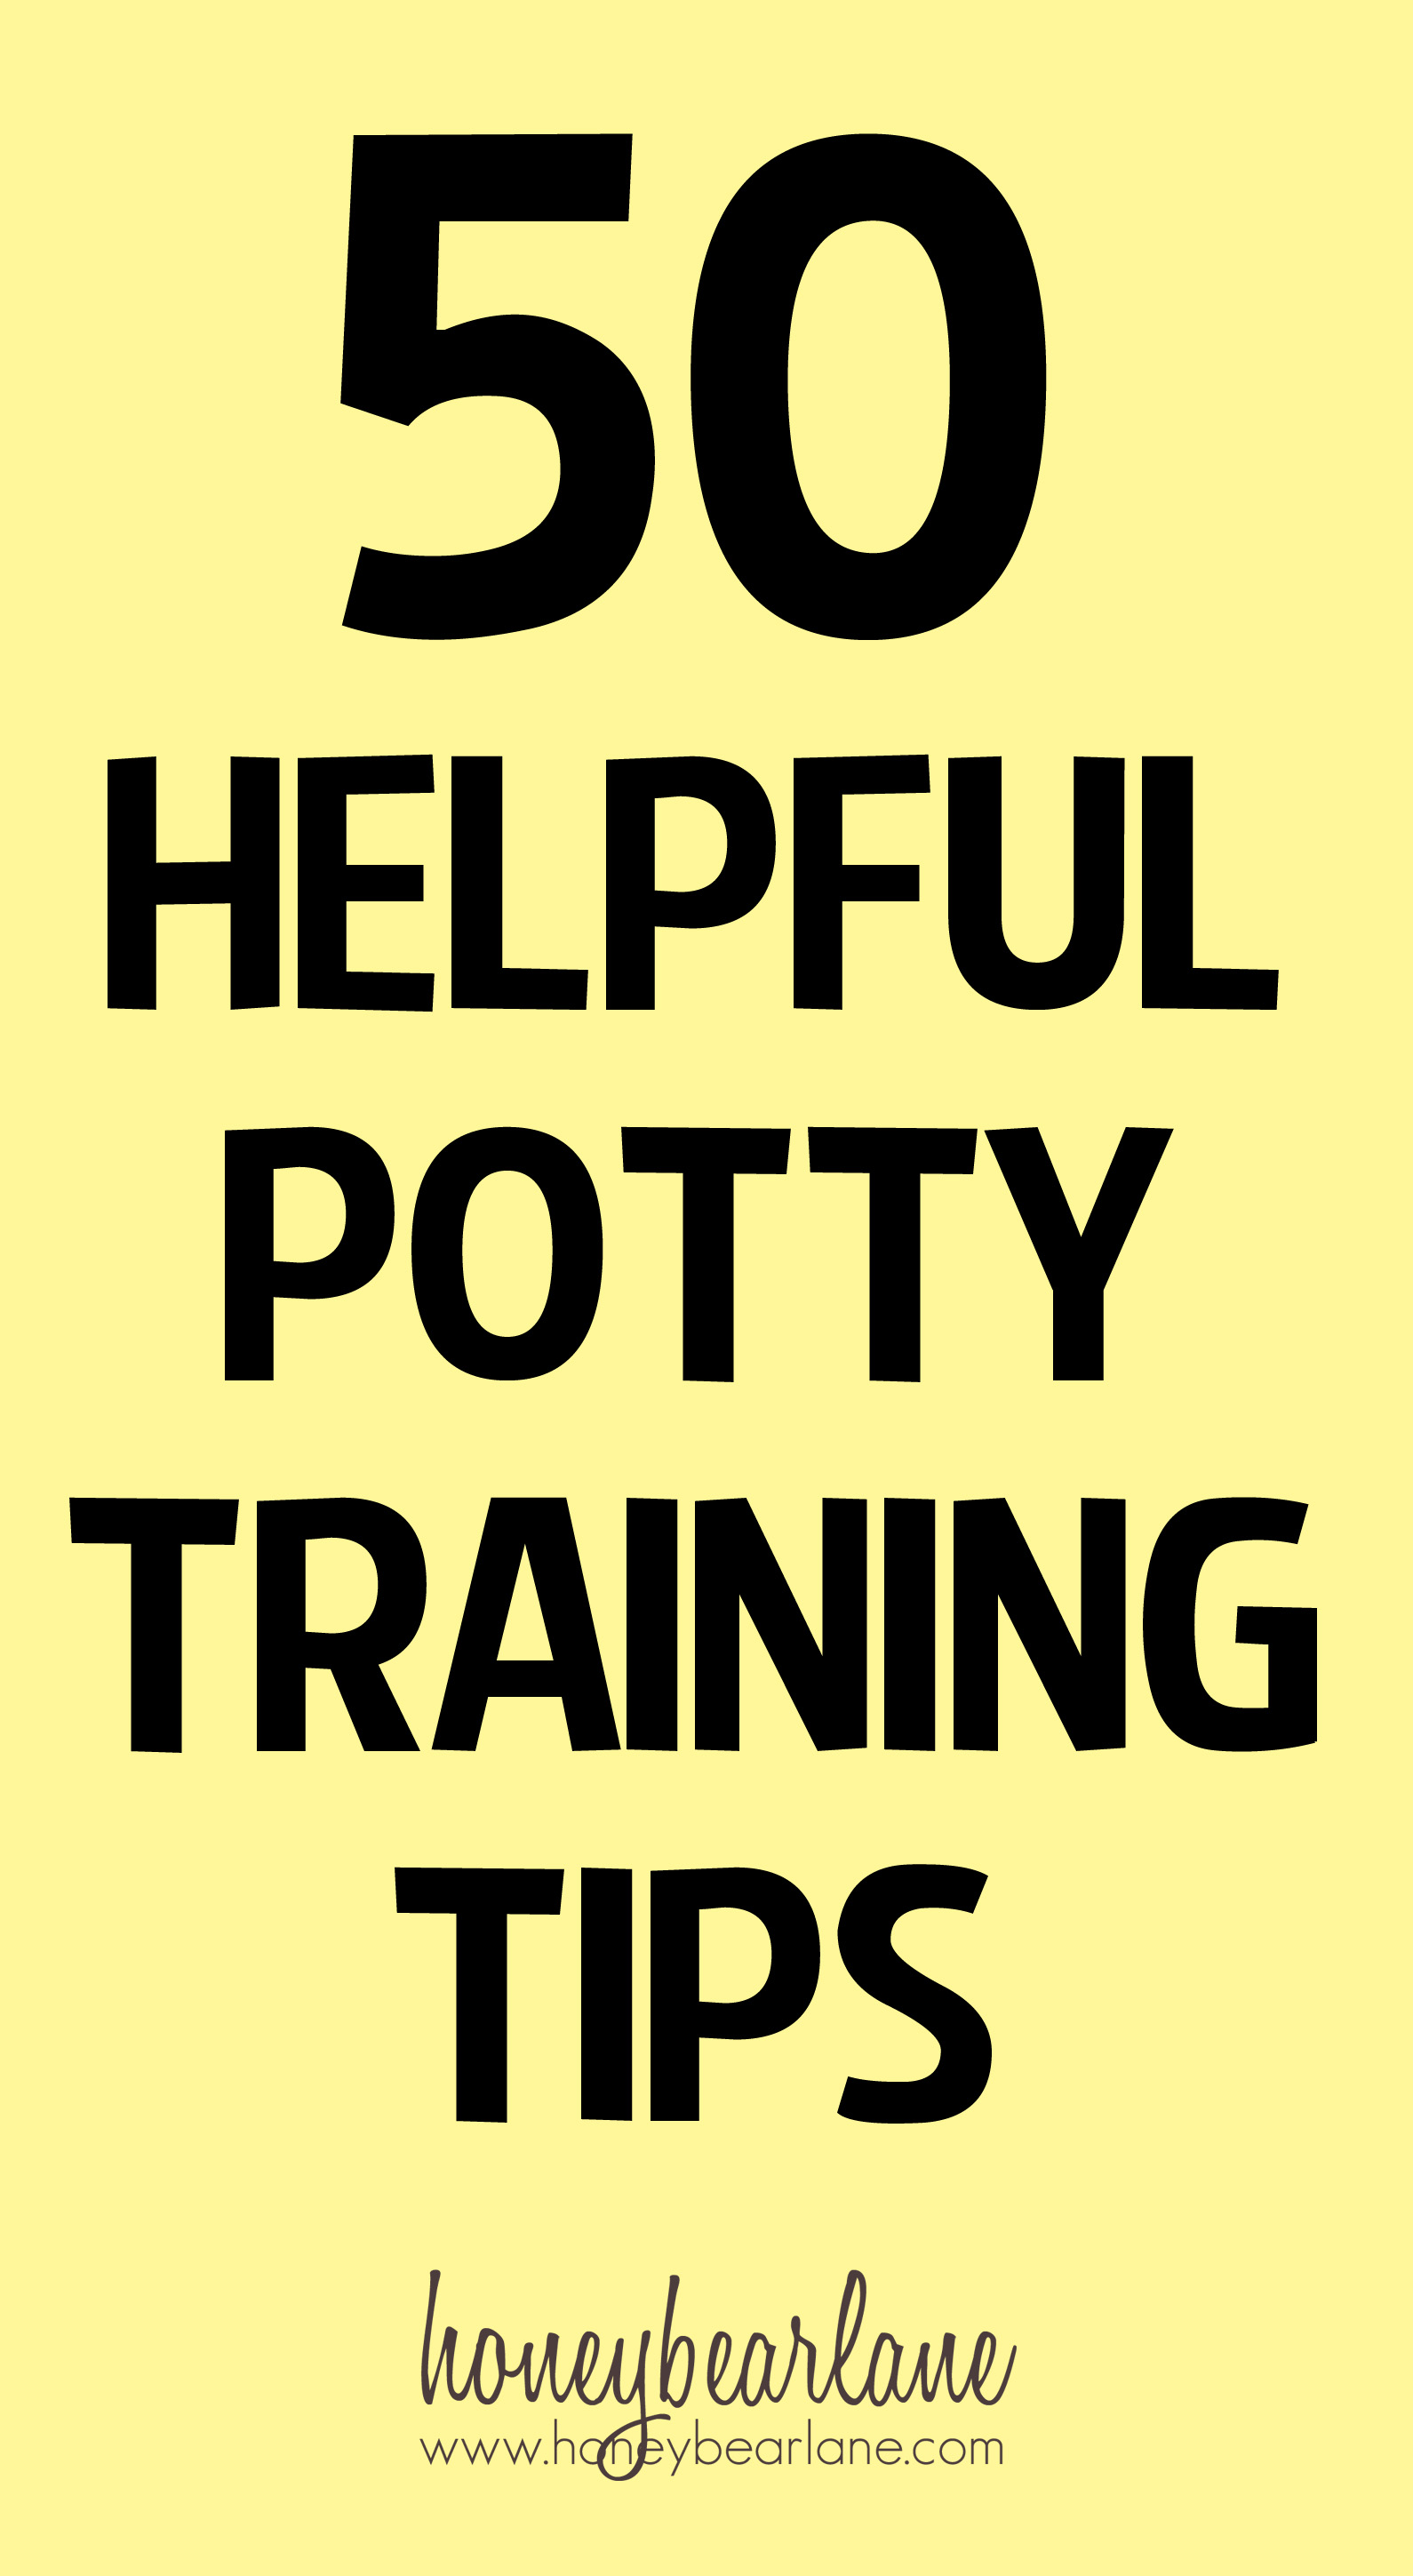 How to Host a Potty Training Party - My Life and Kids  Potty training girls,  Potty training tips, Potty training kids